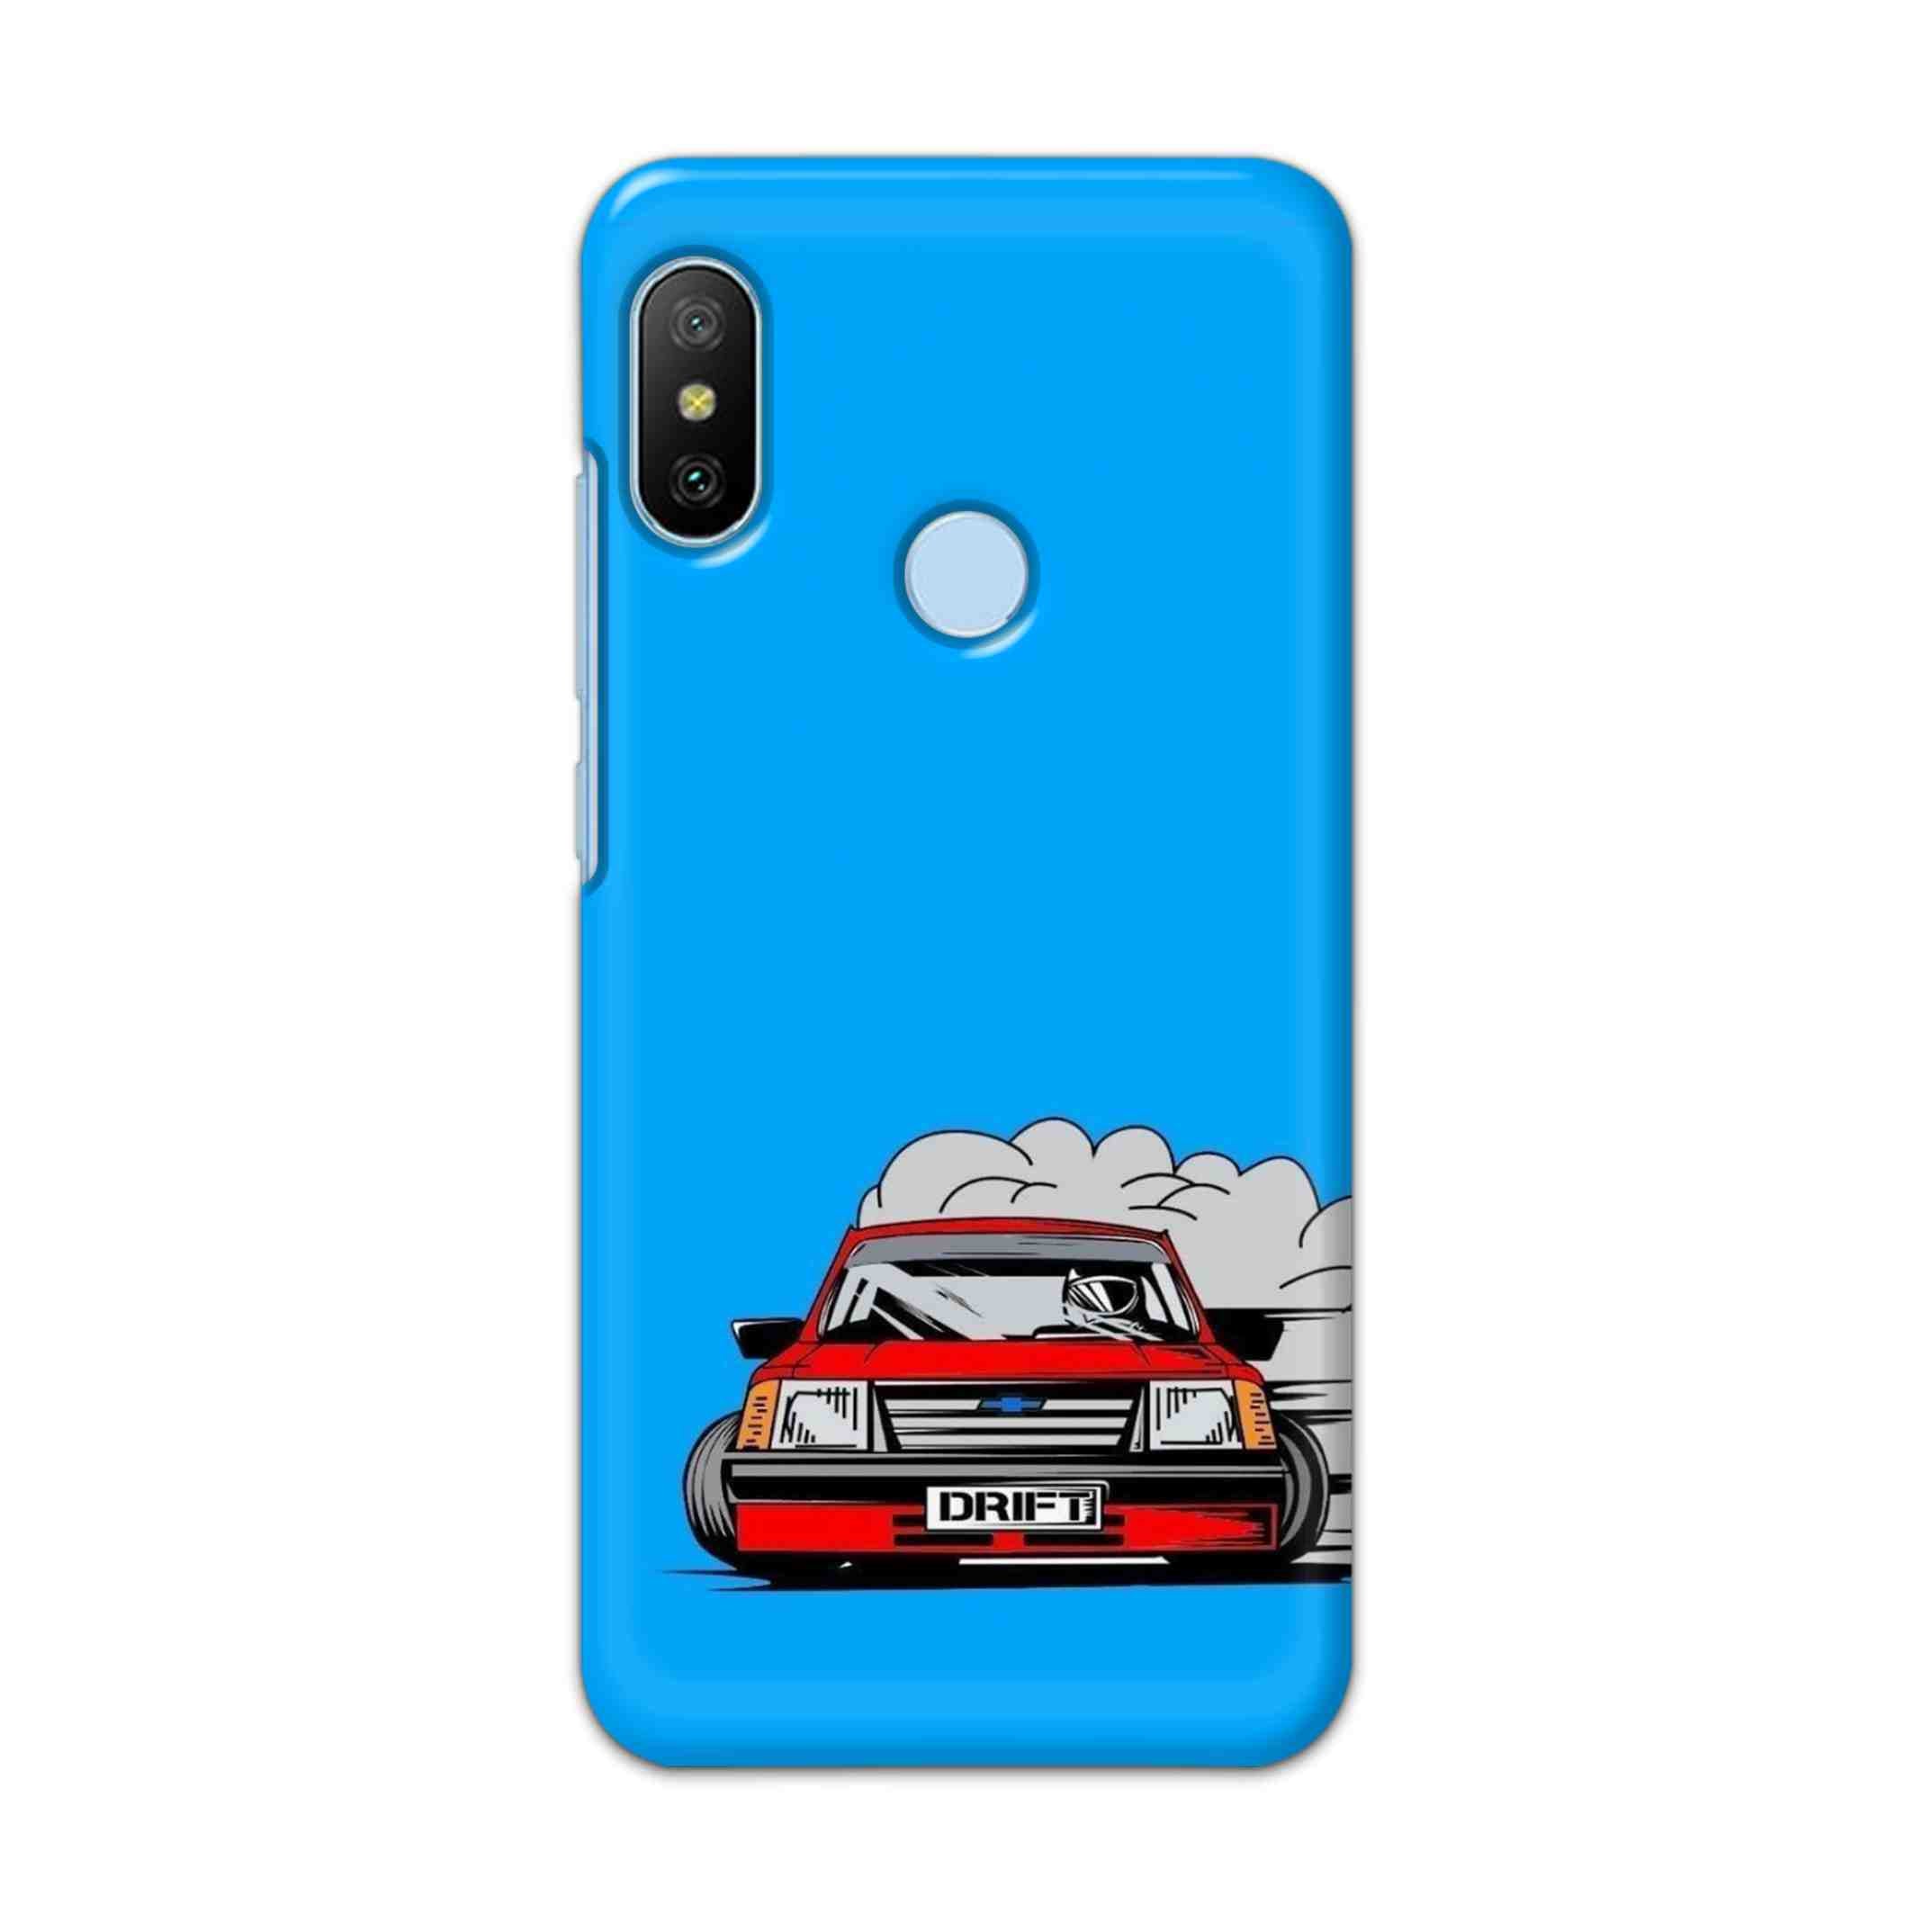 Buy Drift Hard Back Mobile Phone Case/Cover For Xiaomi Redmi 6 Pro Online